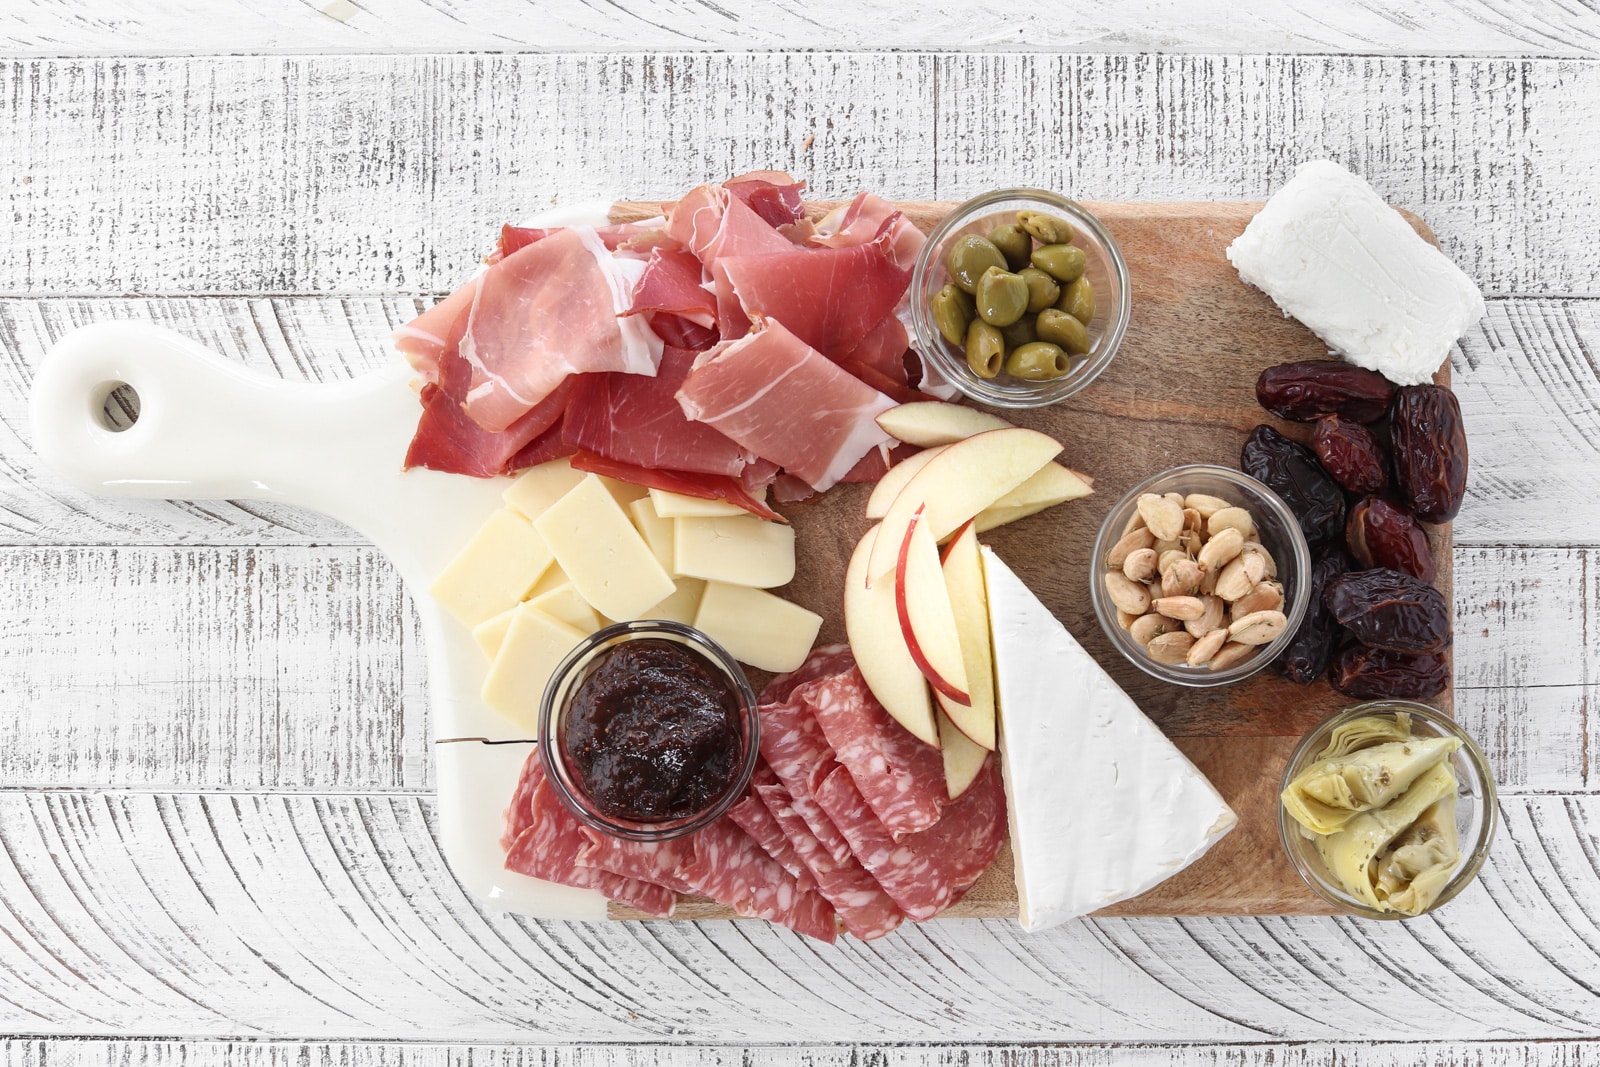 Cutting board with almonds, artichokes, cheeses, smoked meats, apples, fig butter  and dates.